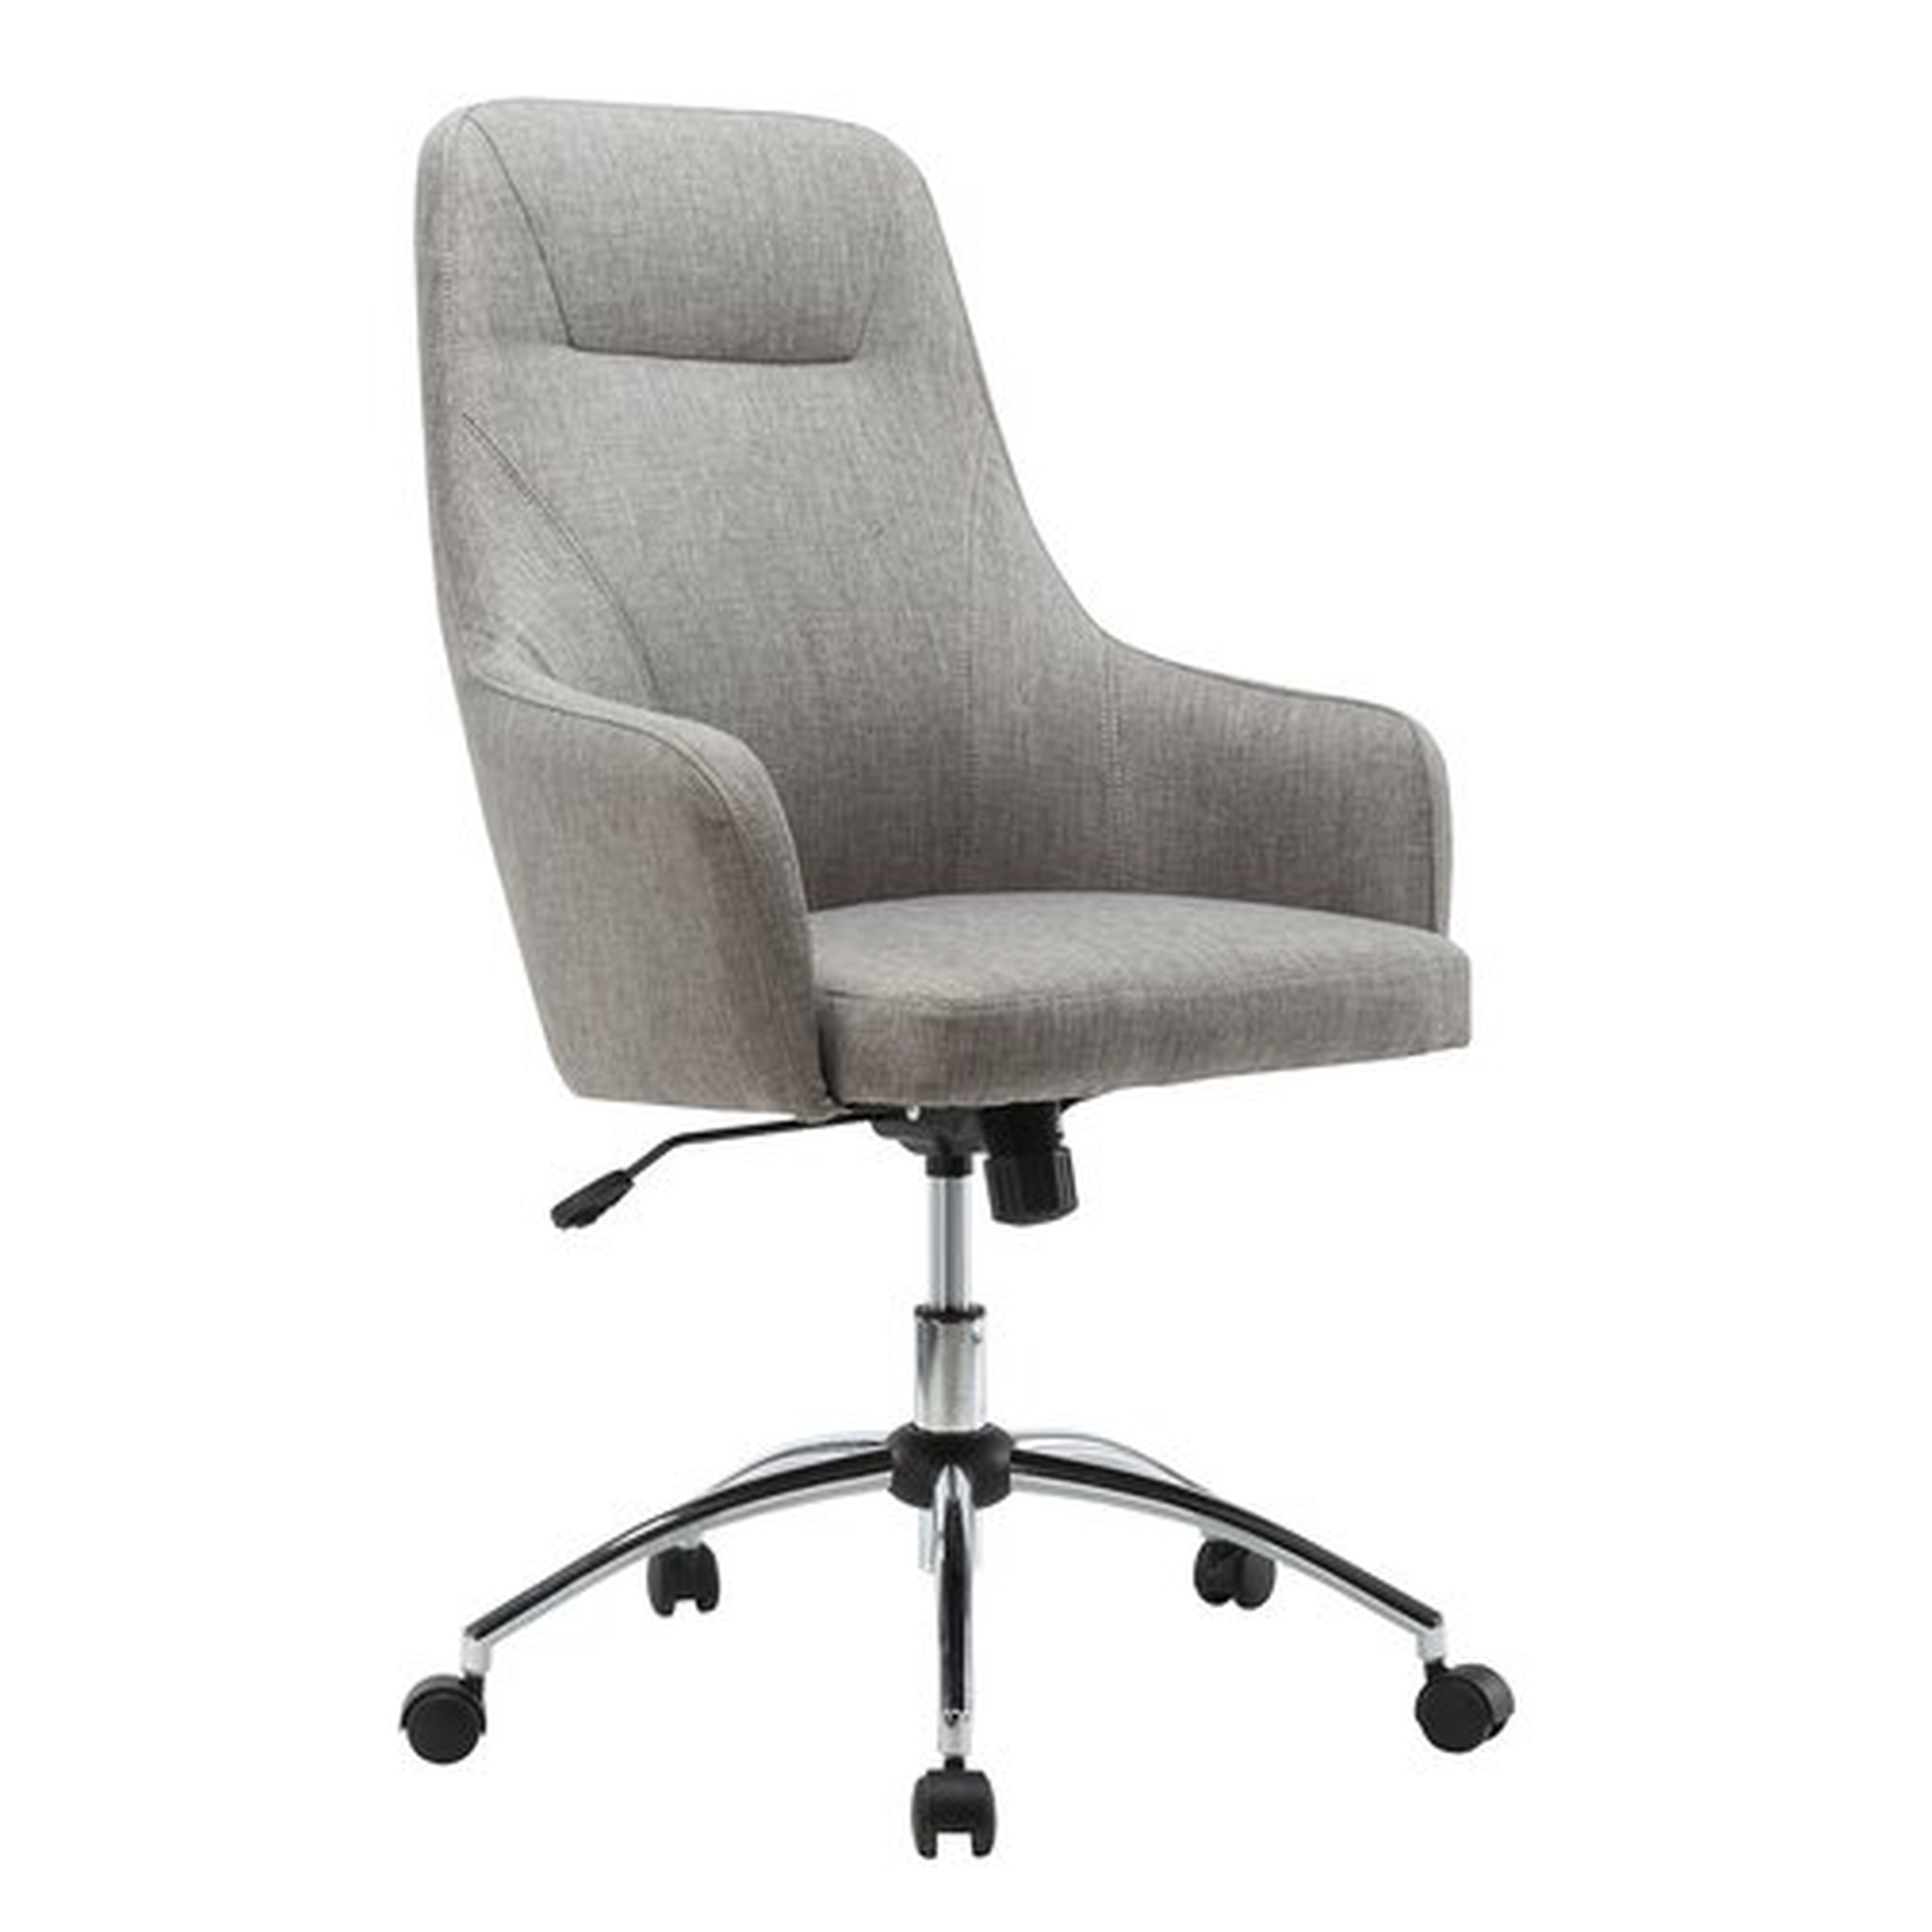 Cave Spring Comfy Height Adjustable Rolling Office High-Back Executive Chair - Wayfair